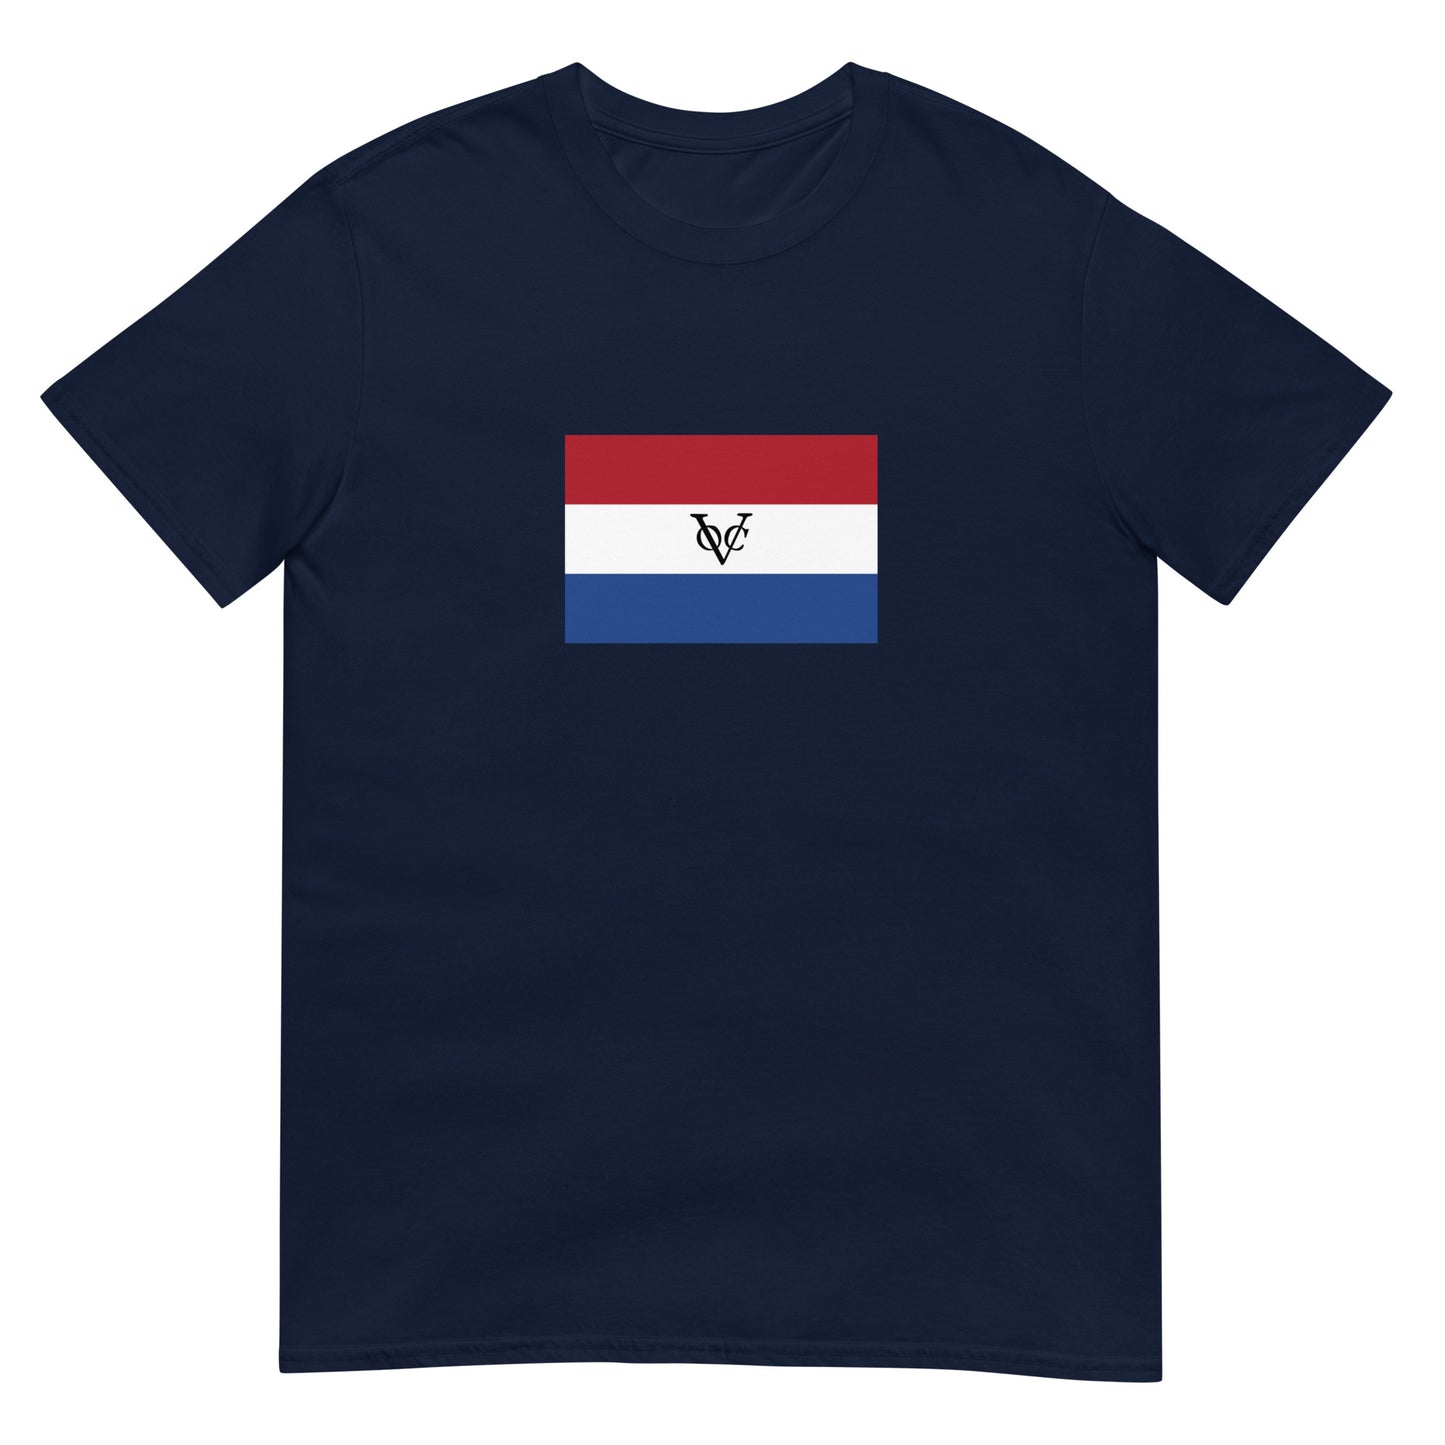 South Africa - Dutch East India Company (1652-1806) | South Africa Flag Interactive History T-Shirt